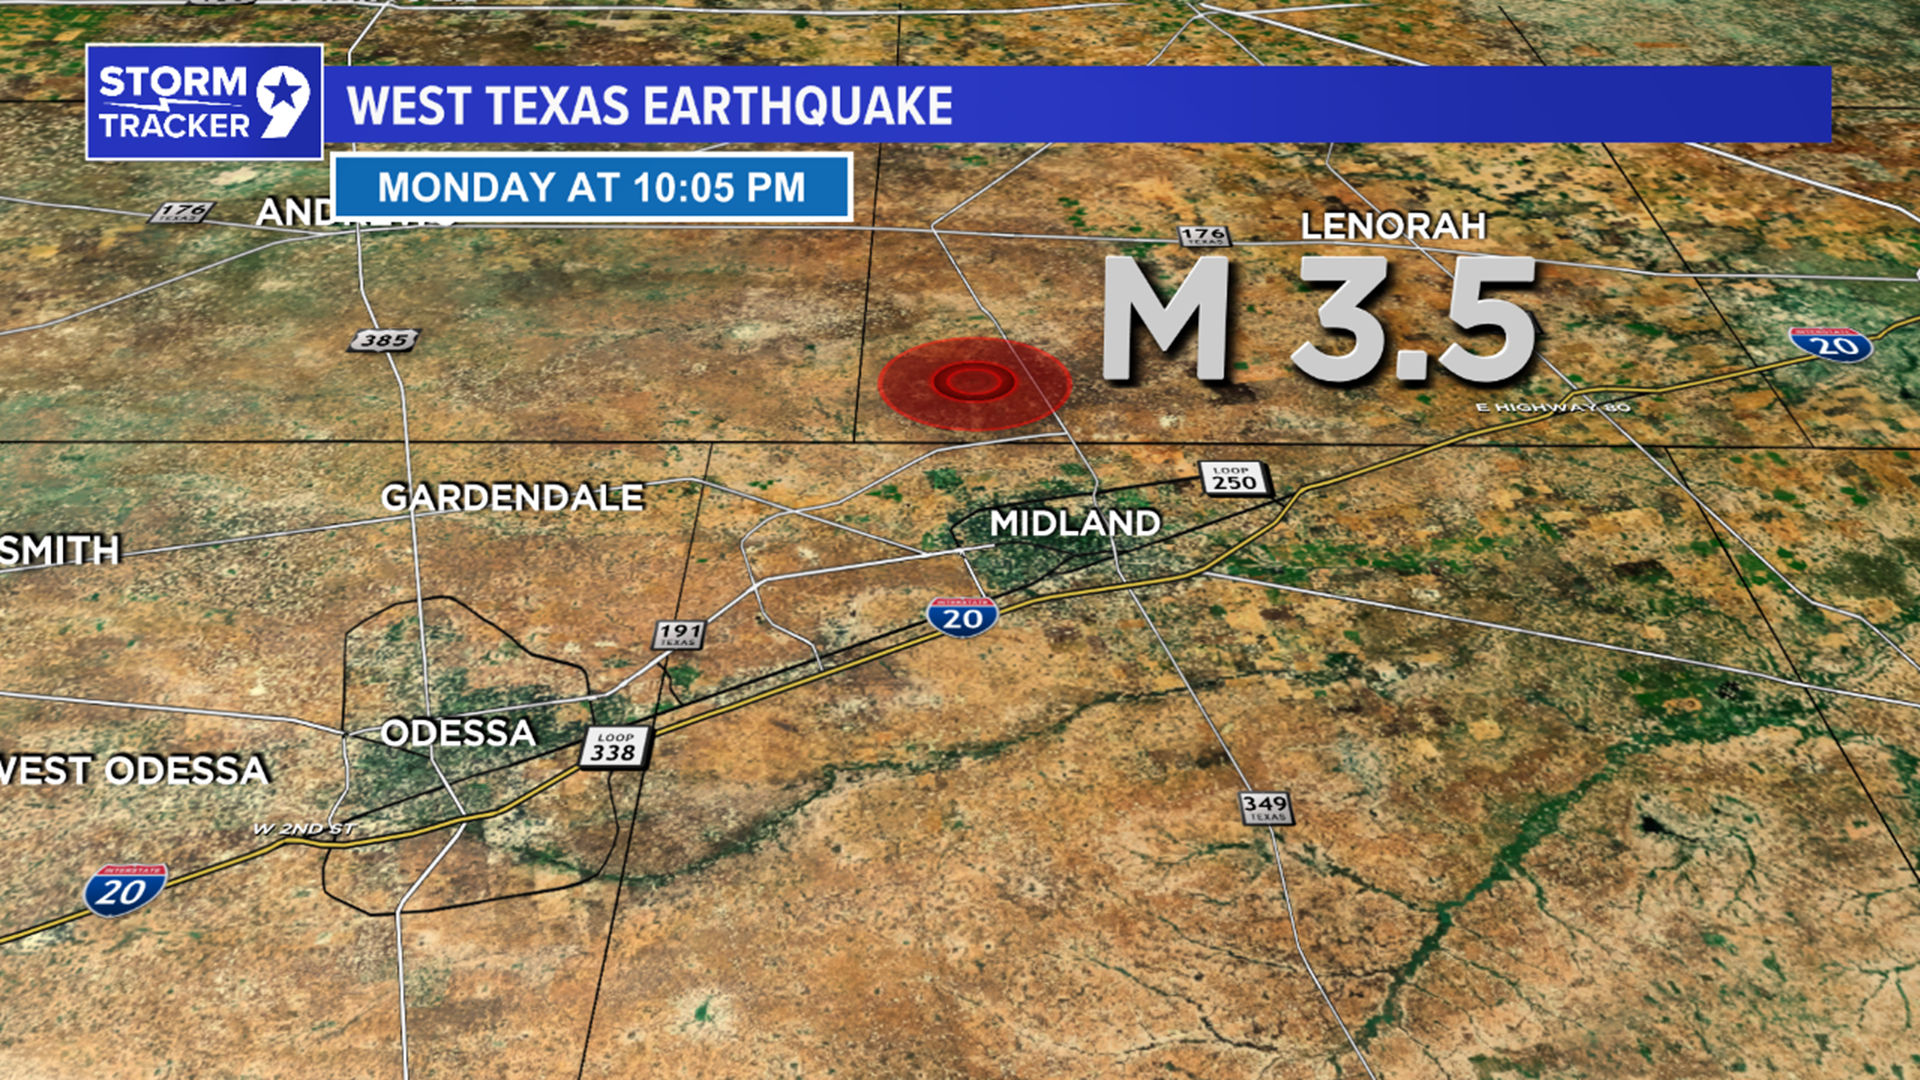 USGS reported an earthquake northwest of Midland just after 10 p.m. Monday.